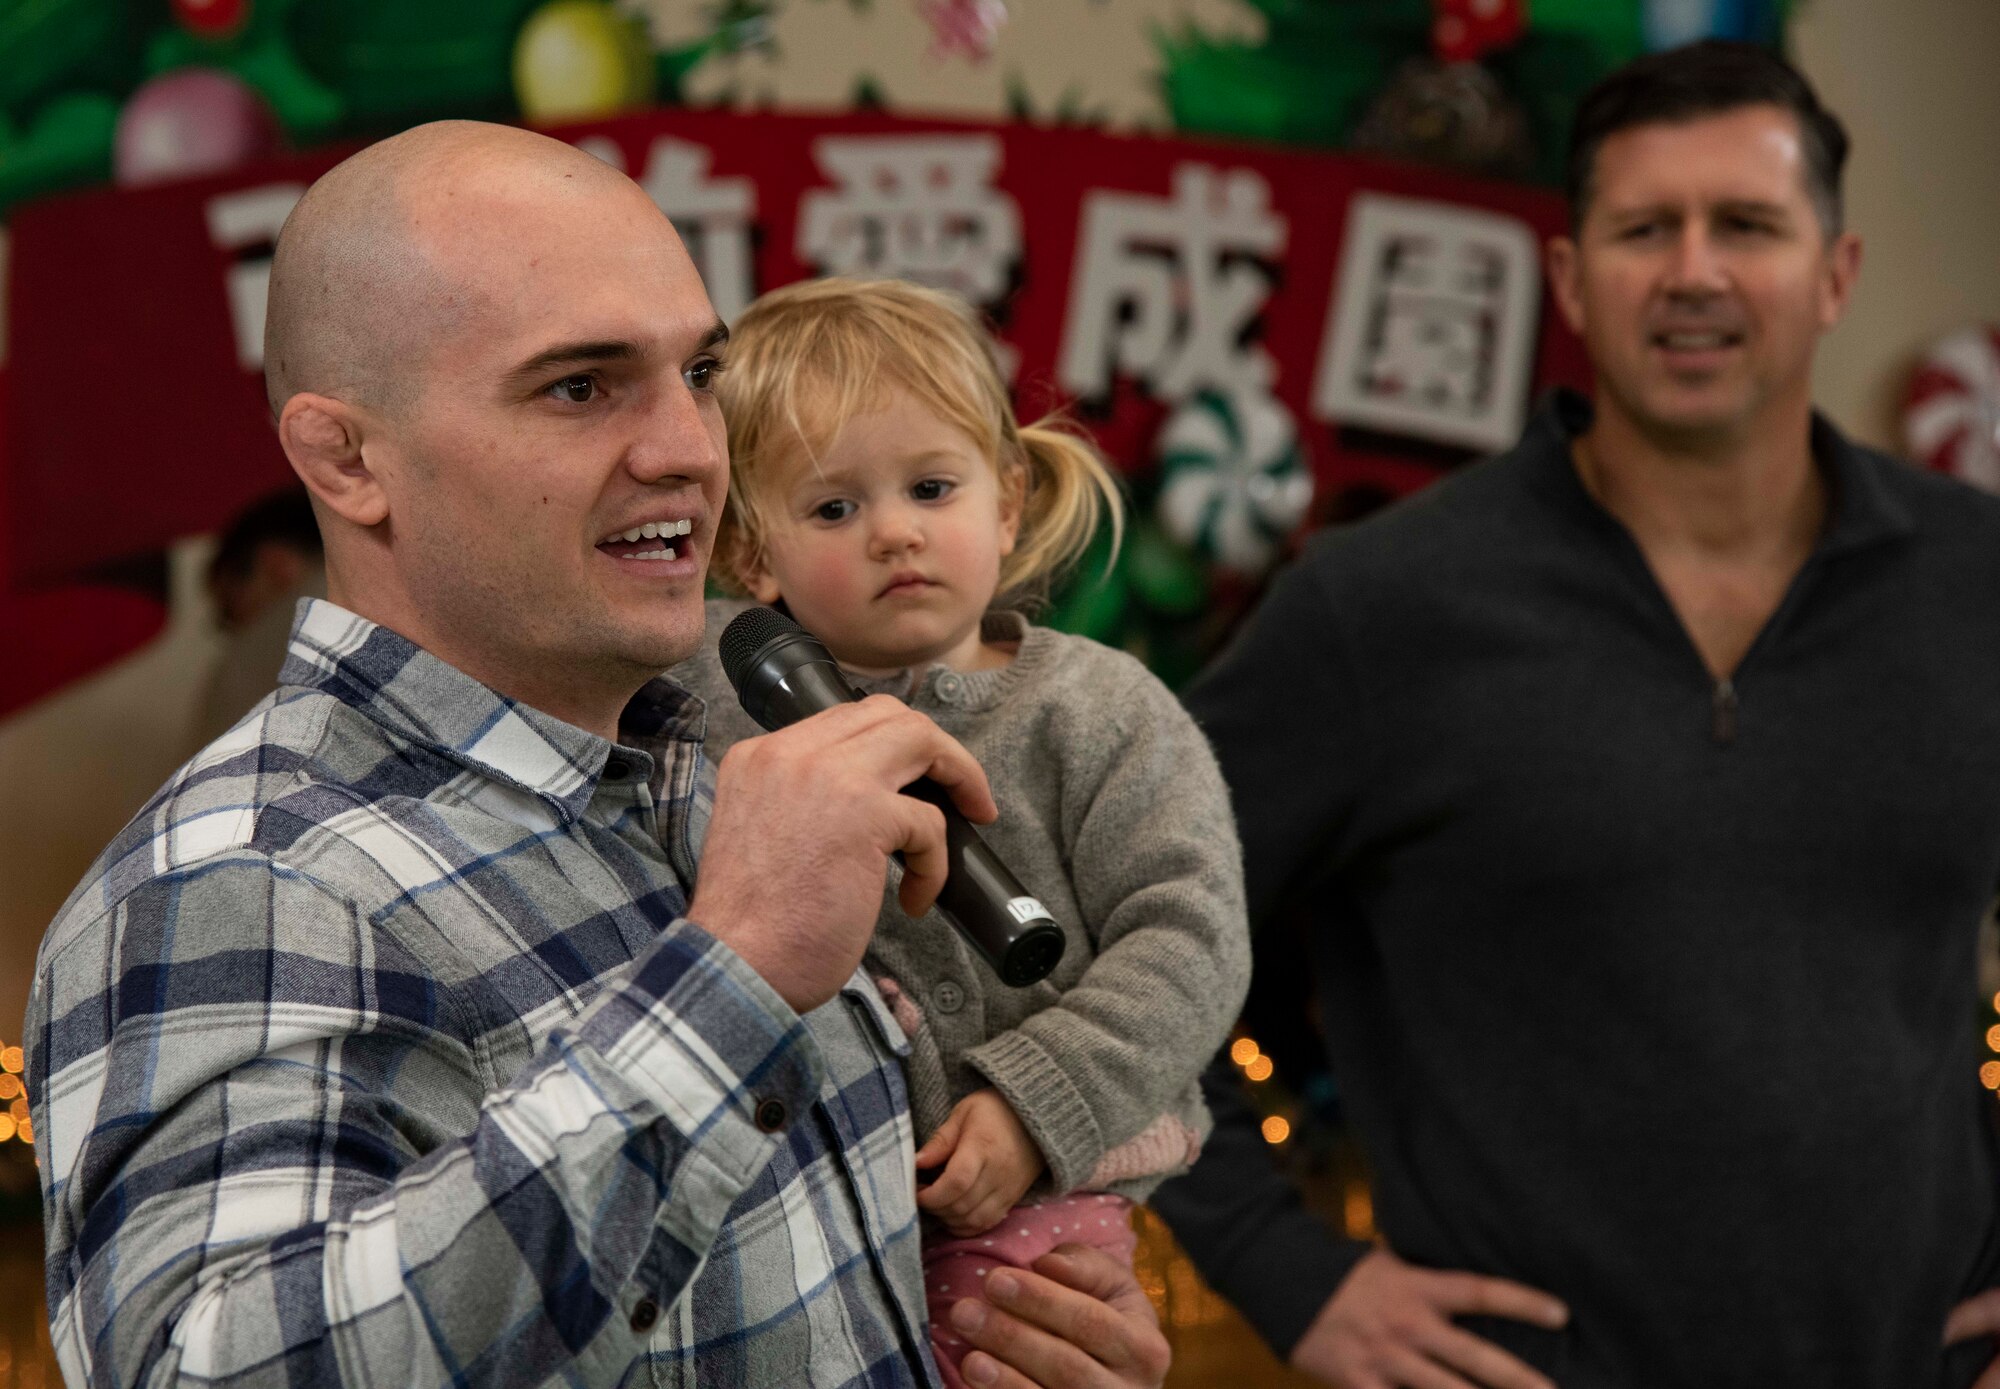 U.S. Air Force 1st Lt. Taylor Hollister, the 35th Operations Group chief of intelligence, introduces himself to familiar faces, while holding his daughter, Ella, during a Hirosaki Ai-Sei-En orphanage visit, in Hirosaki, Japan, Dec. 8, 2018. Hollister speaks Japanese fluently and provided assistance in organizing the event through his skills and past experience in visiting the center. (U.S. Air Force photo by Senior Airman Sadie Colbert)